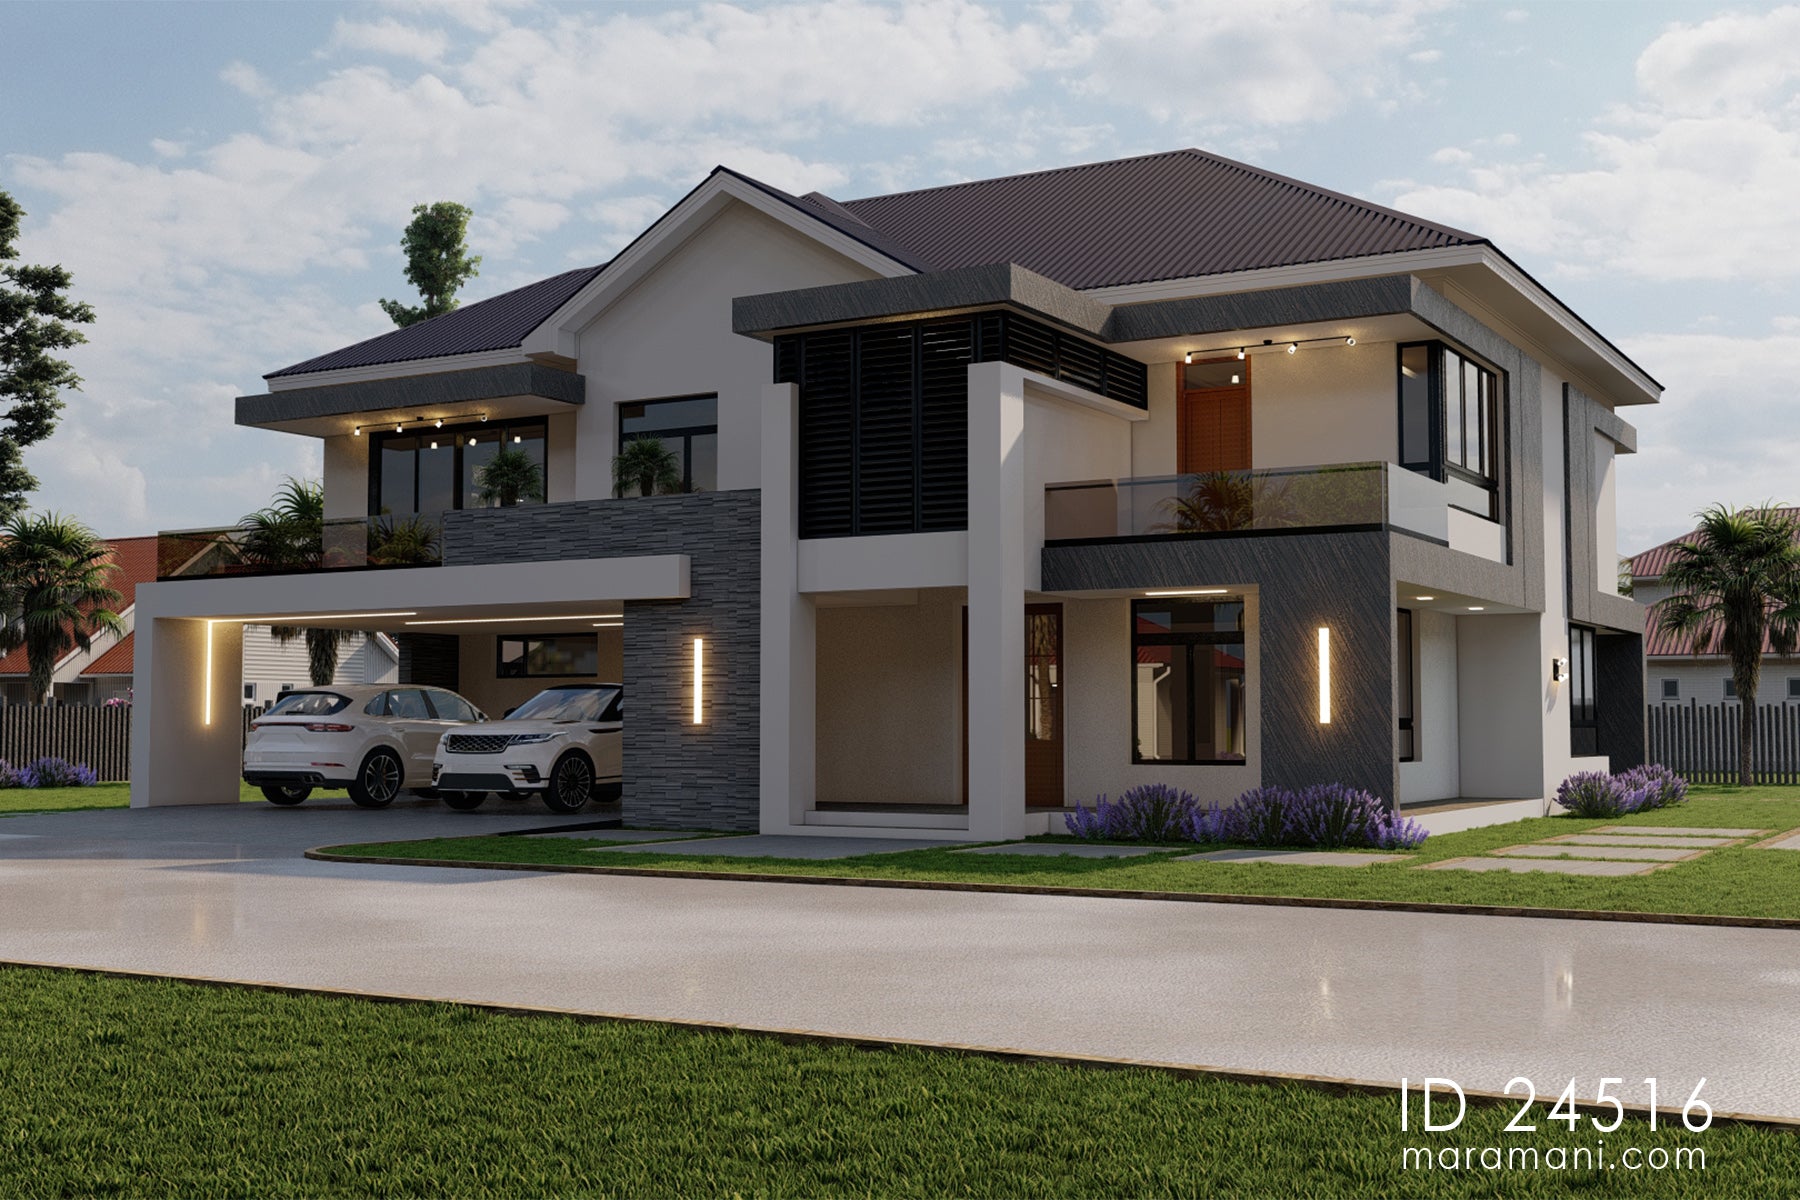 Modern 4 Bedroom Double Storey House - Id 24516 - House Plans By Maramani